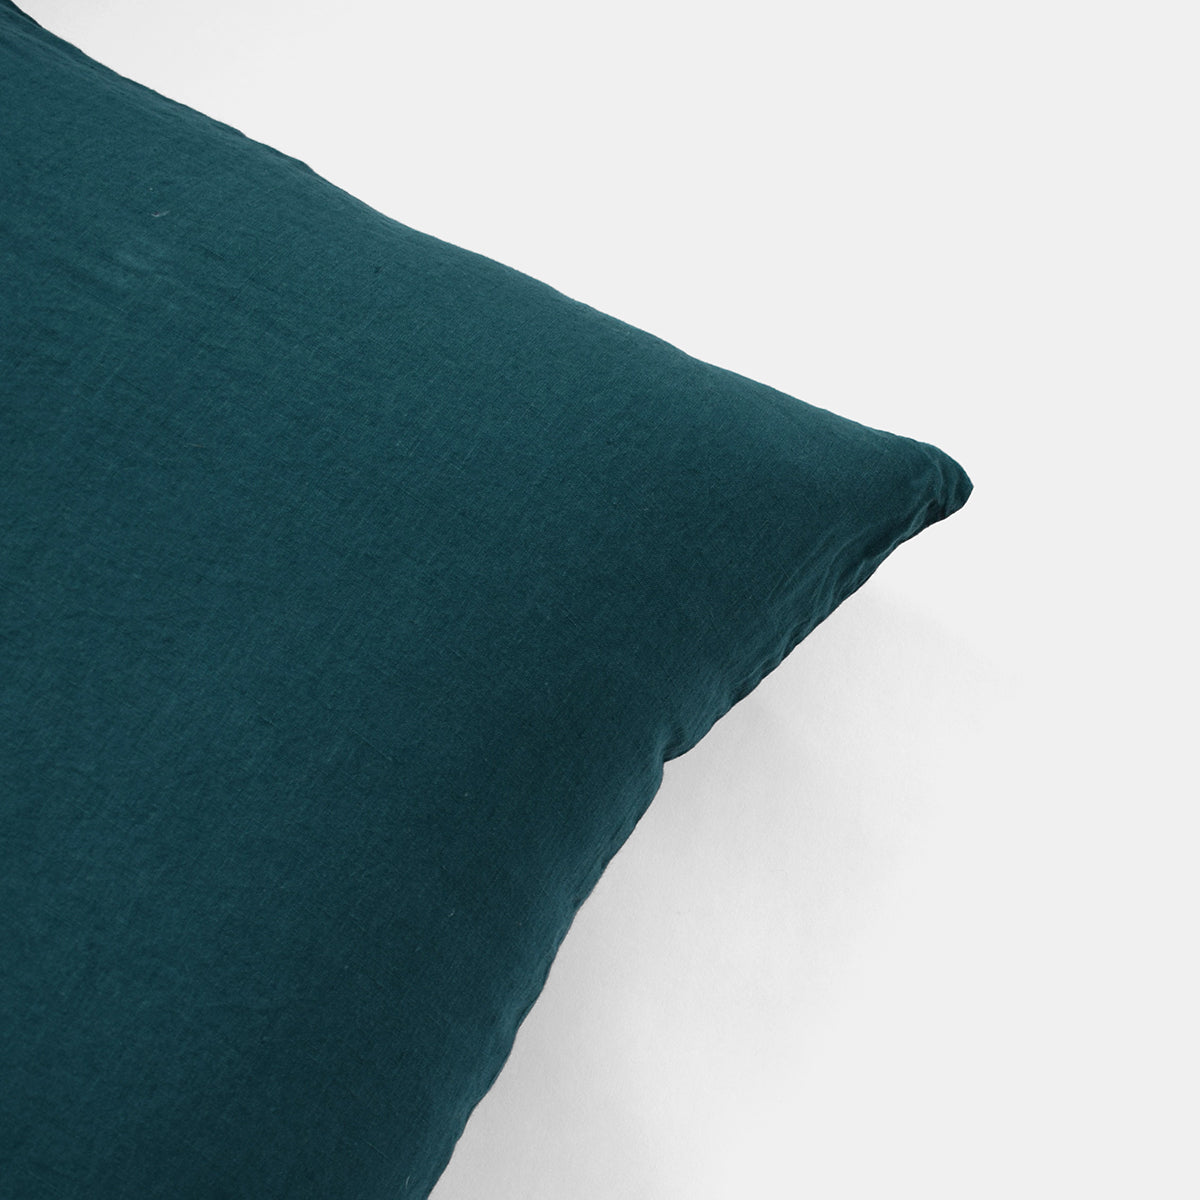 Linge Particulier Vintage Green Standard Linen Pillowcase Sham for a colorful linen bedding look in deep teal green - Collyer&#39;s Mansion